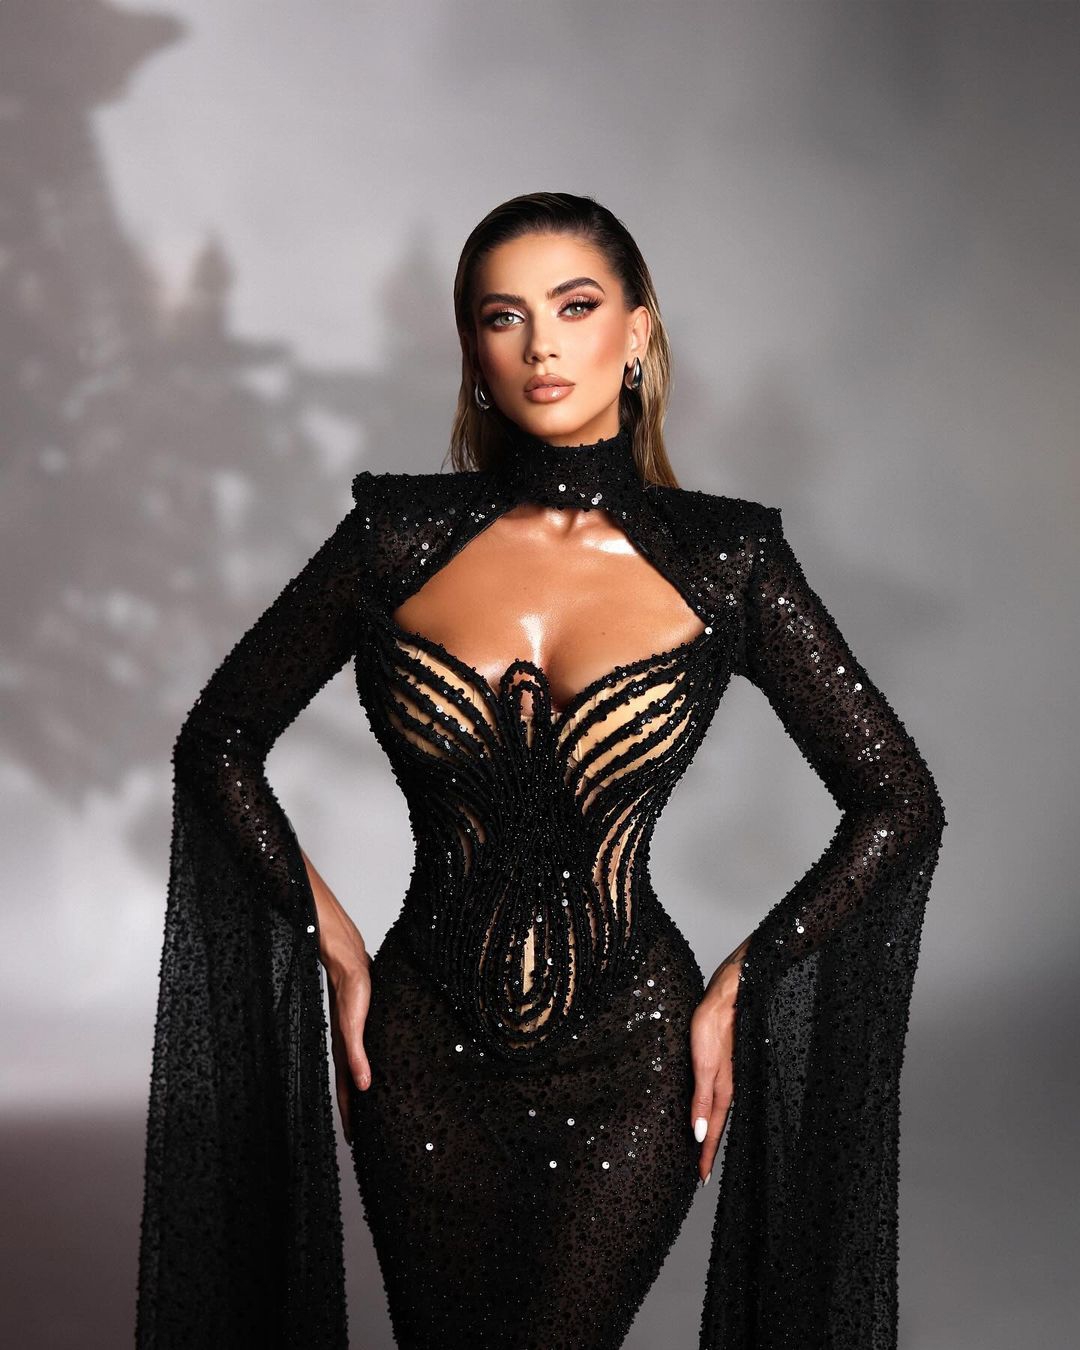 Modern Black Mermaid Evening Dresses Long Cap Sleeves High Neck Sequins Illusion Formal Prom Occasion Gowns